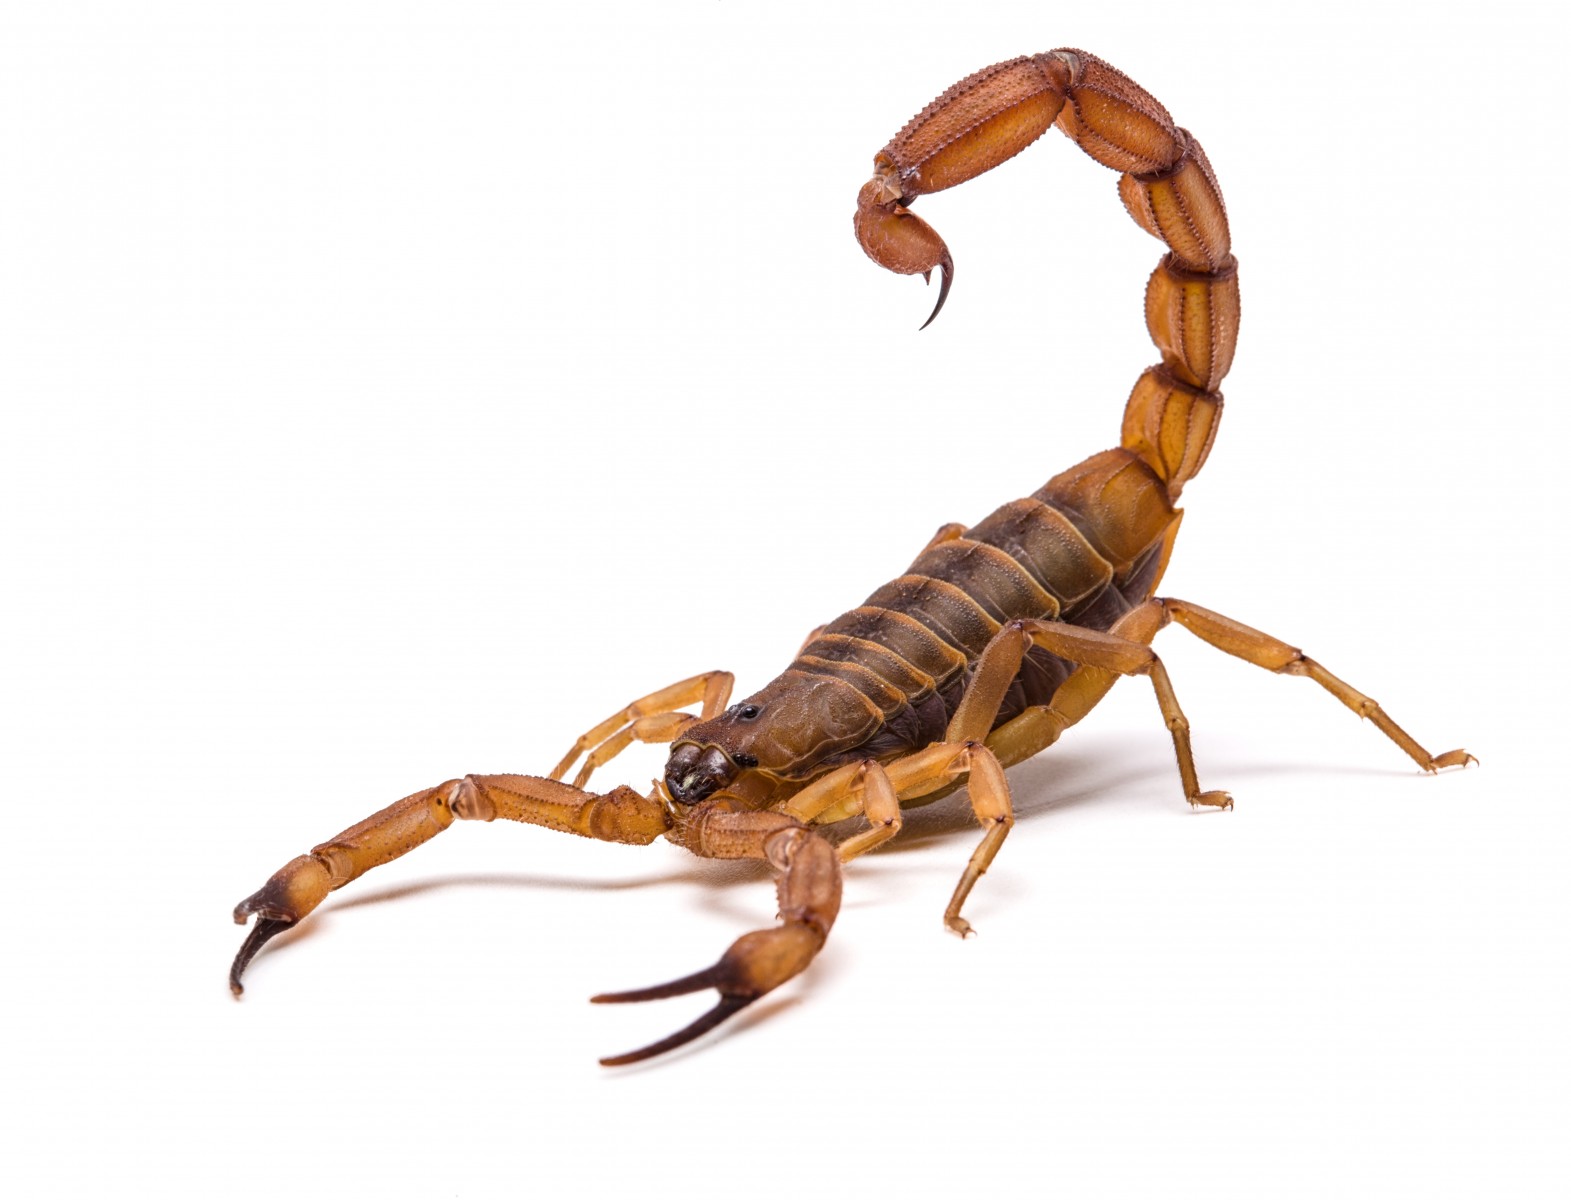 Keeping Scorpions Out of Your House in San Diego